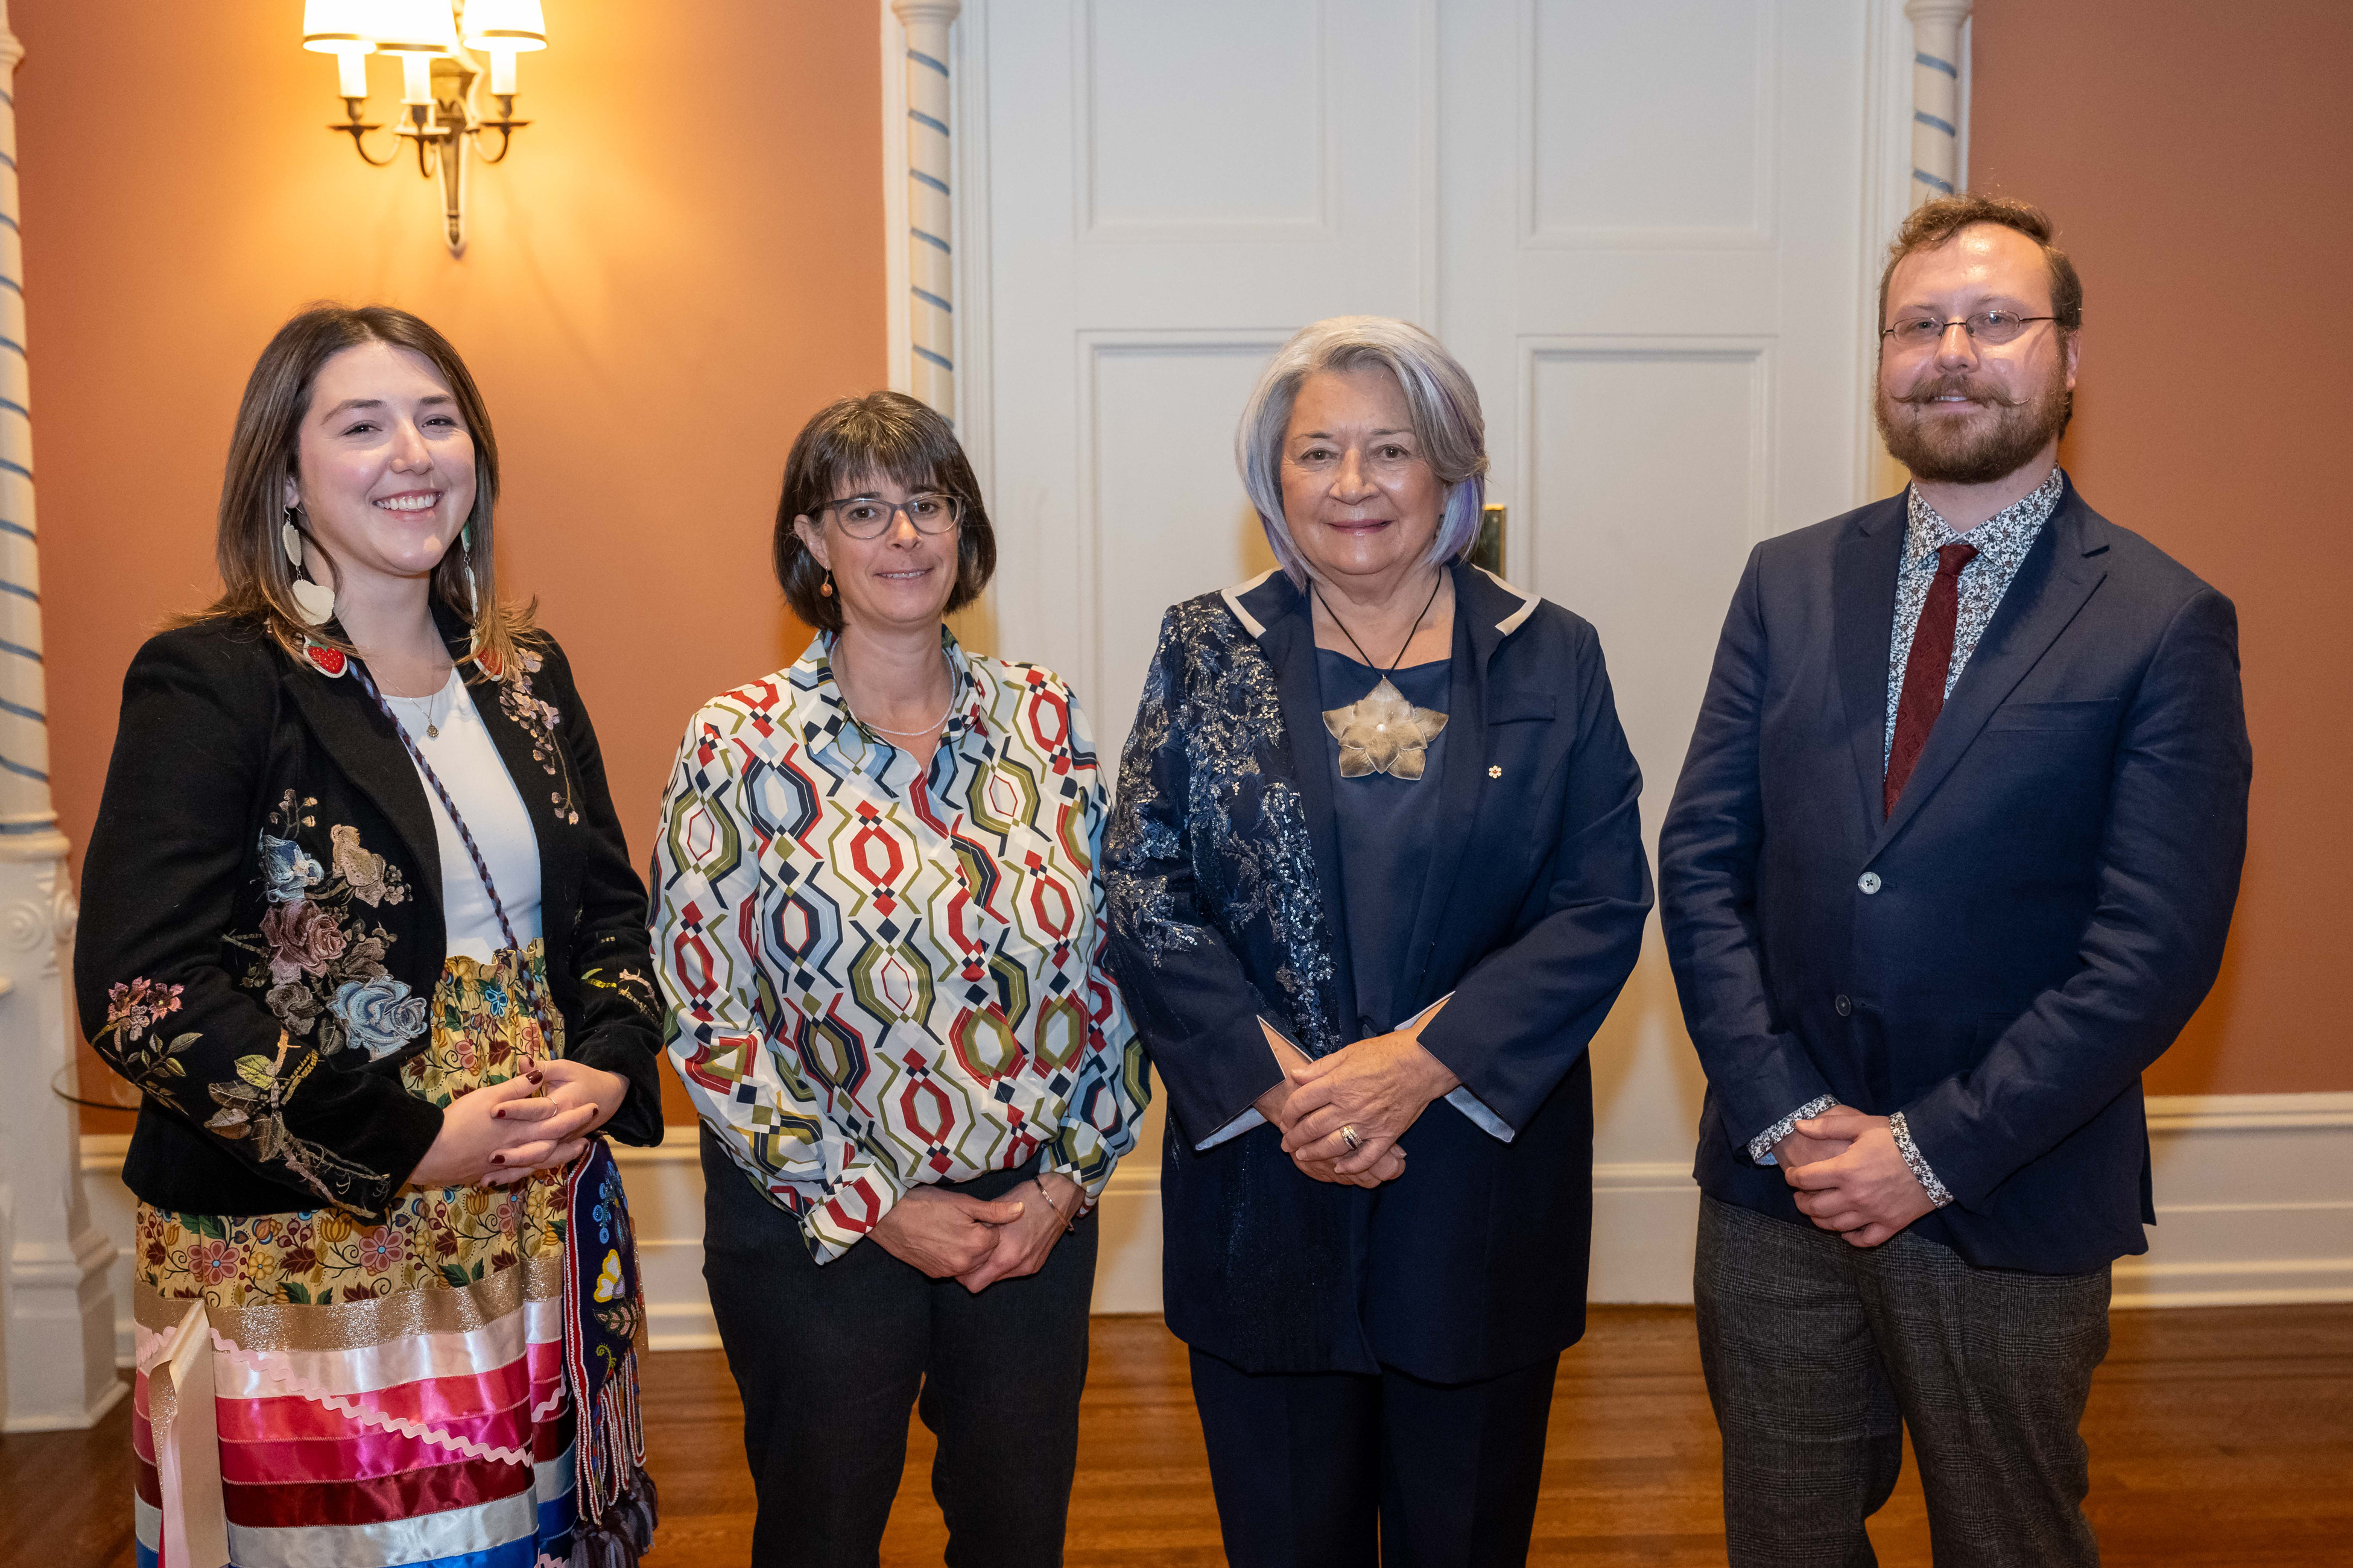 Award recipients Margaret Firlotte, Andrea Reichert and Eric Napier Strong pose with Her Excellency the Right Honourable Mary Simon